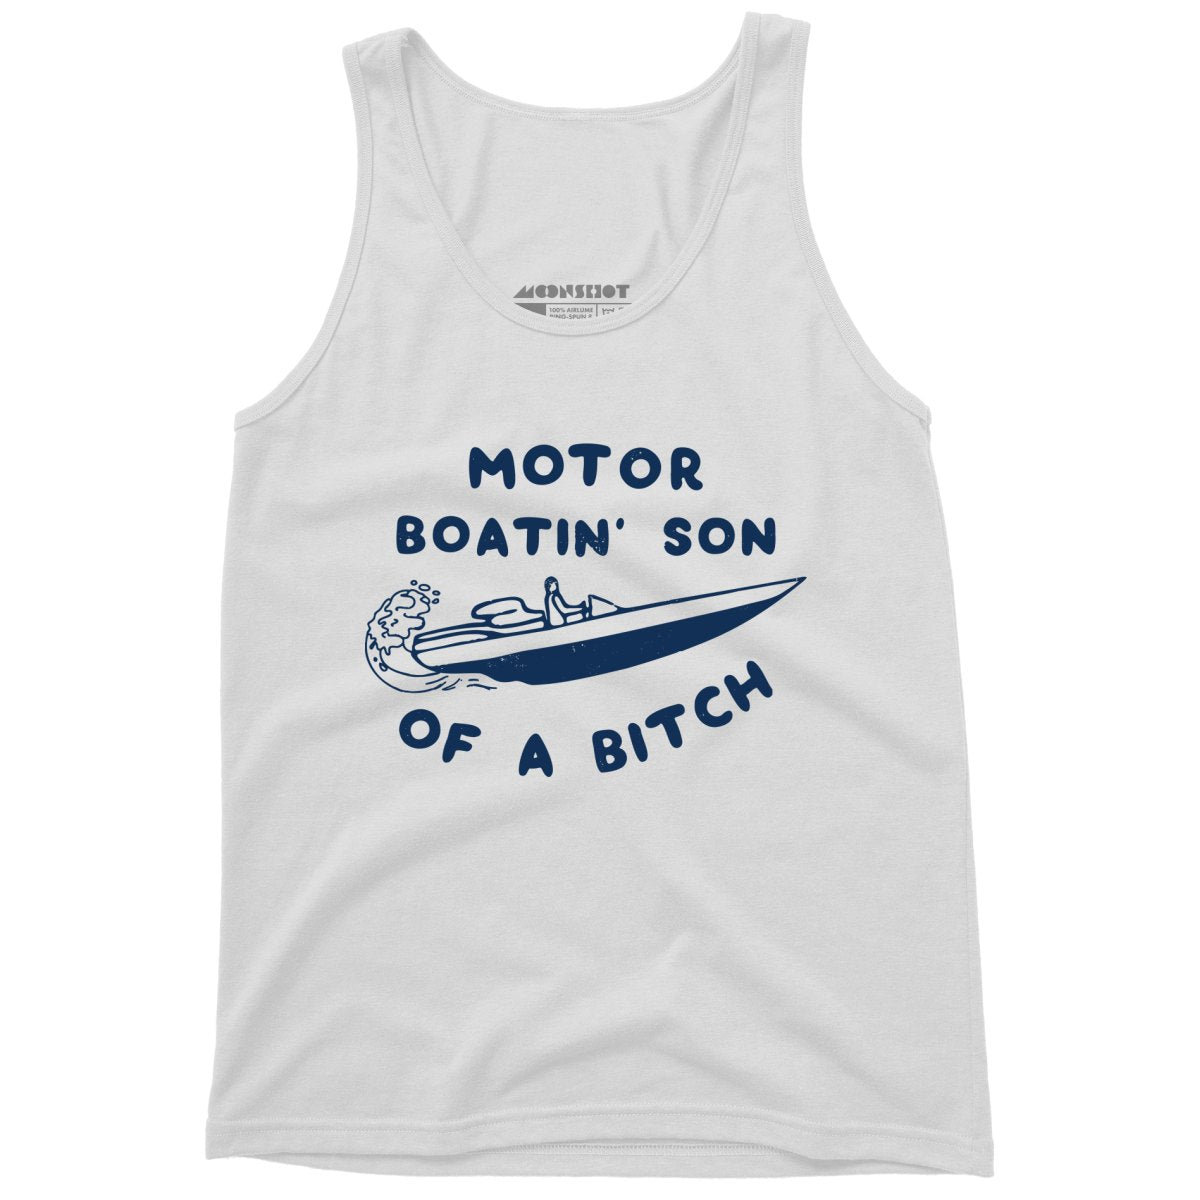 Motor Boatin' Son of a Bitch - Unisex Tank Top